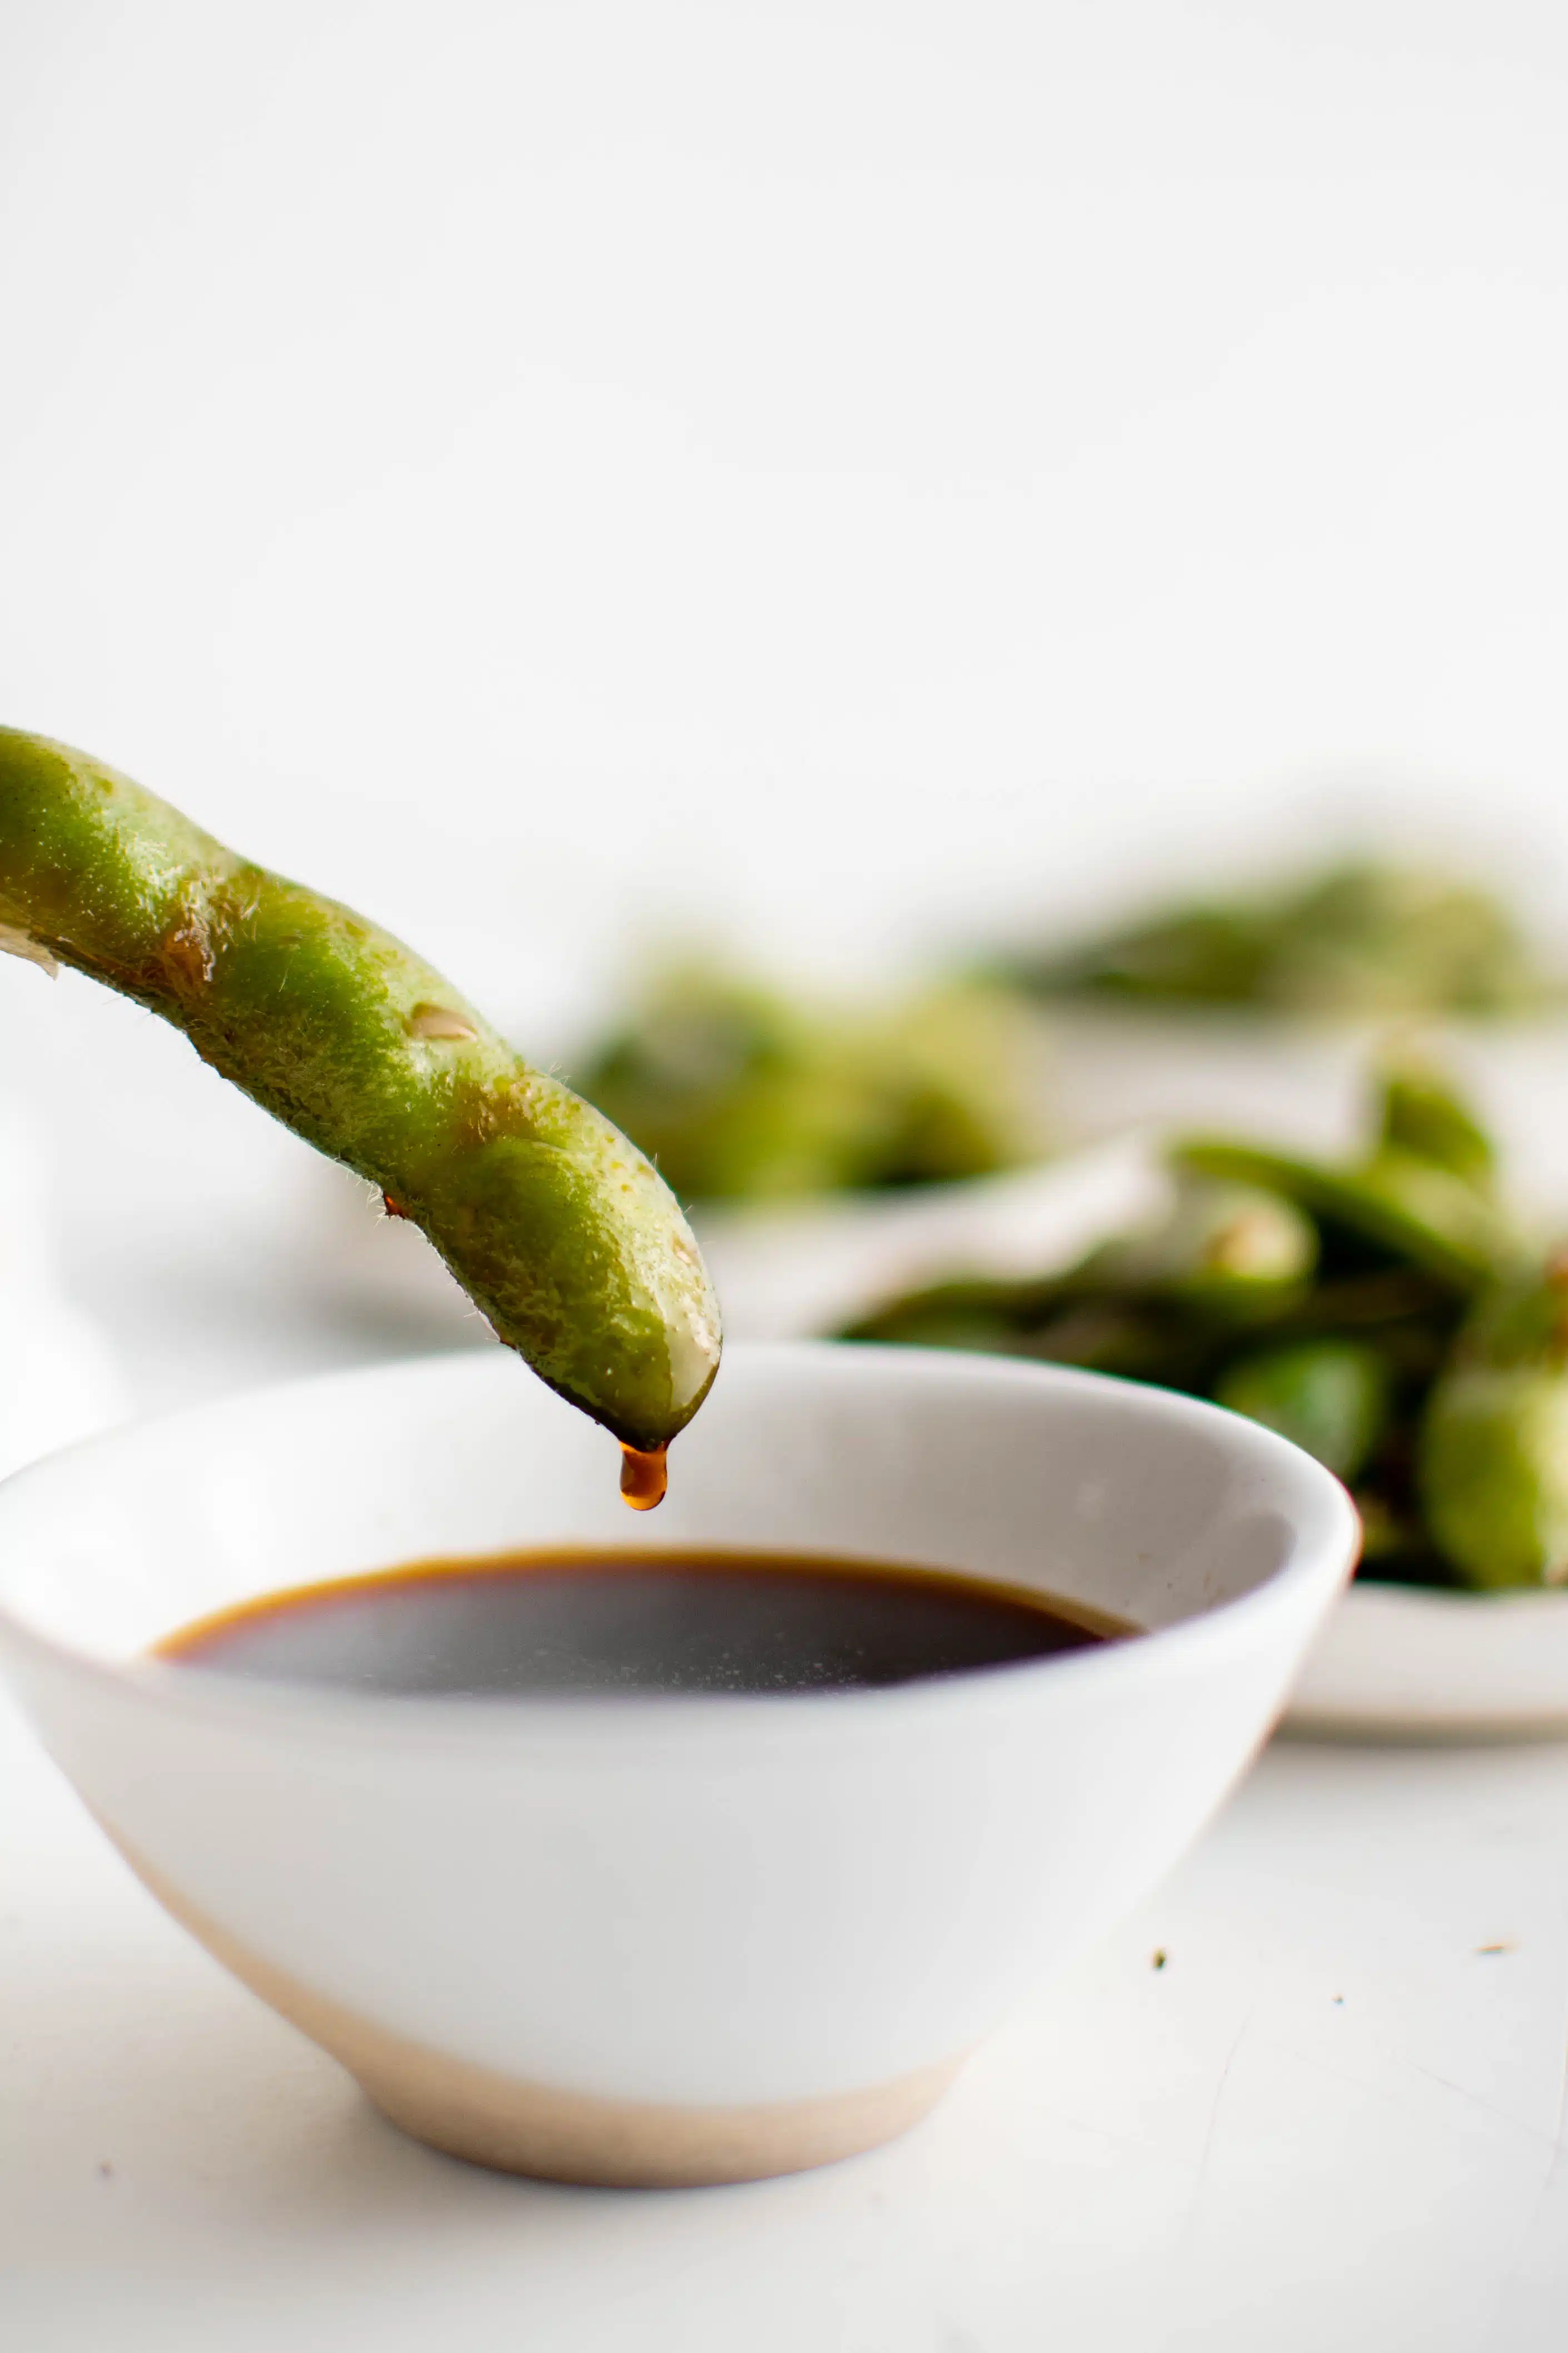 One soybean pod being dipping in a small bowl filled with soy sauce.